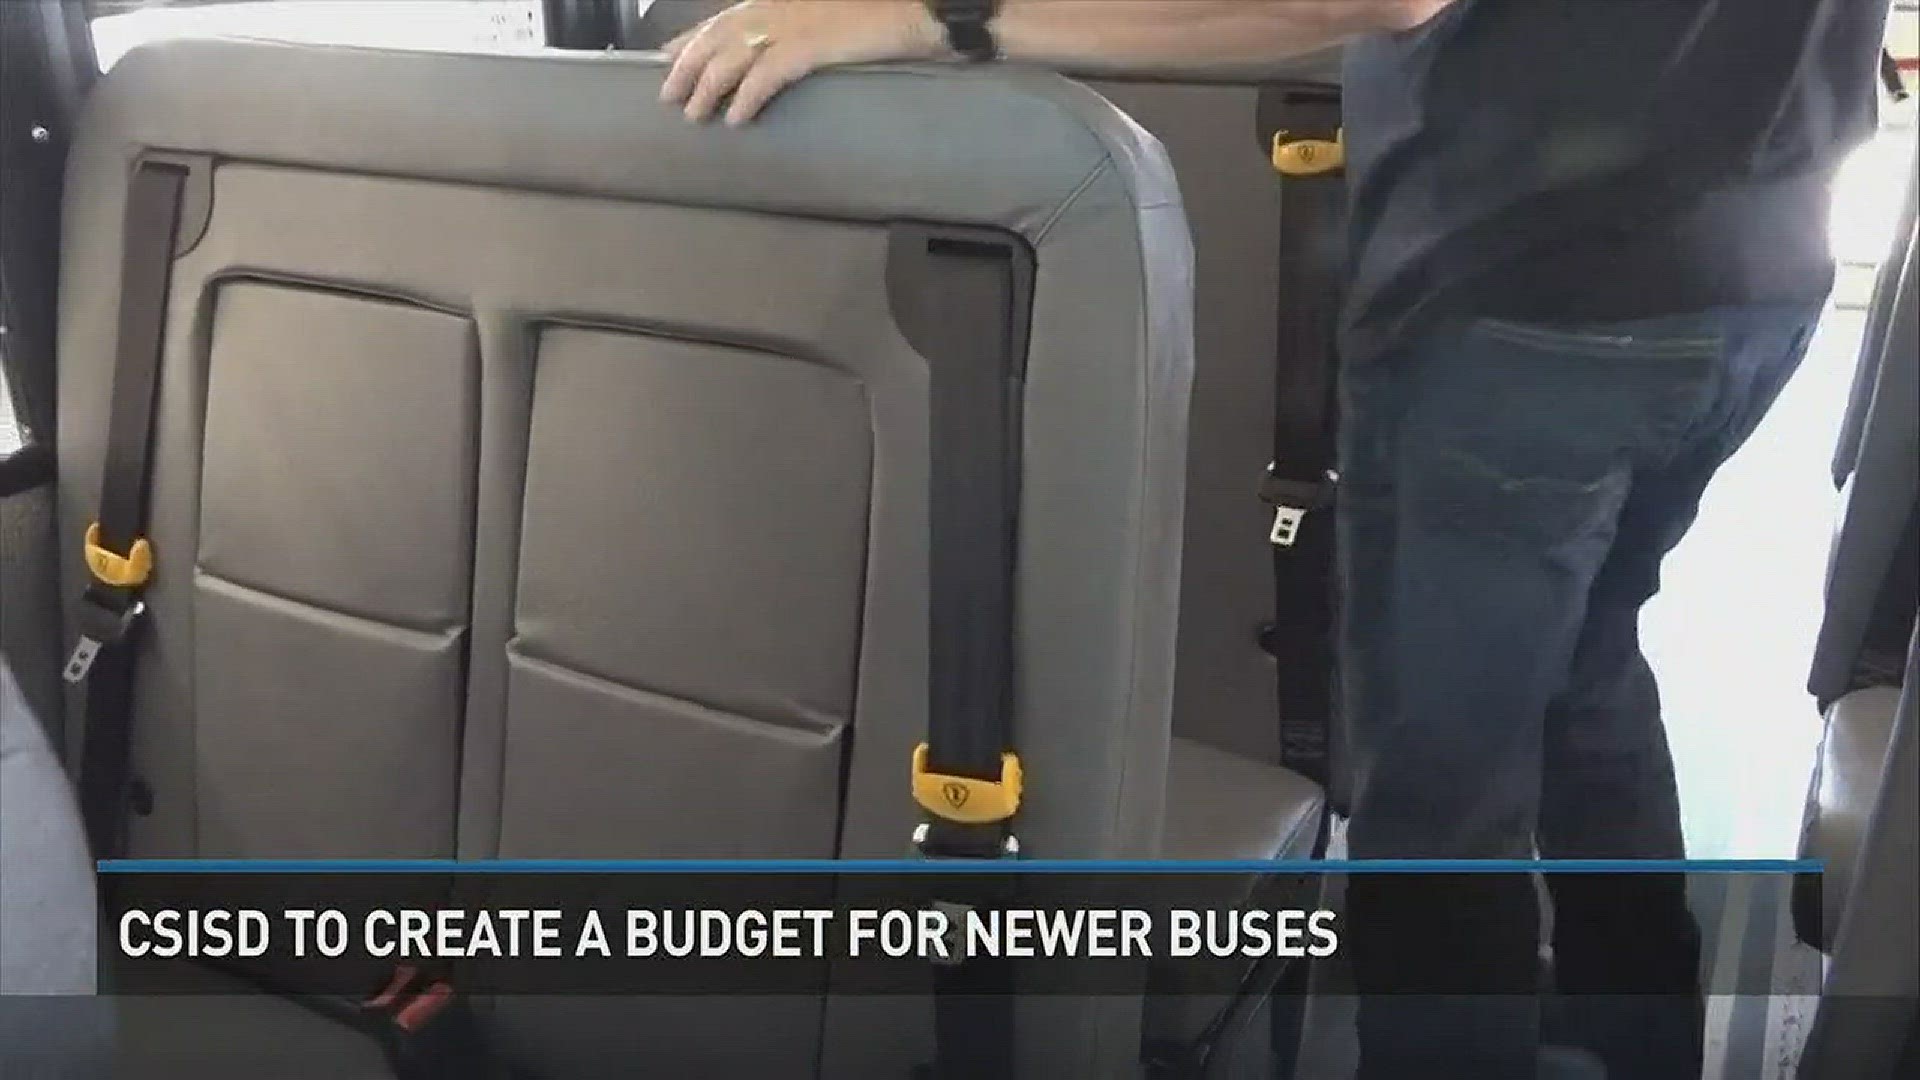 CSISD trying to add as many seat belt-equipped buses to fleet.